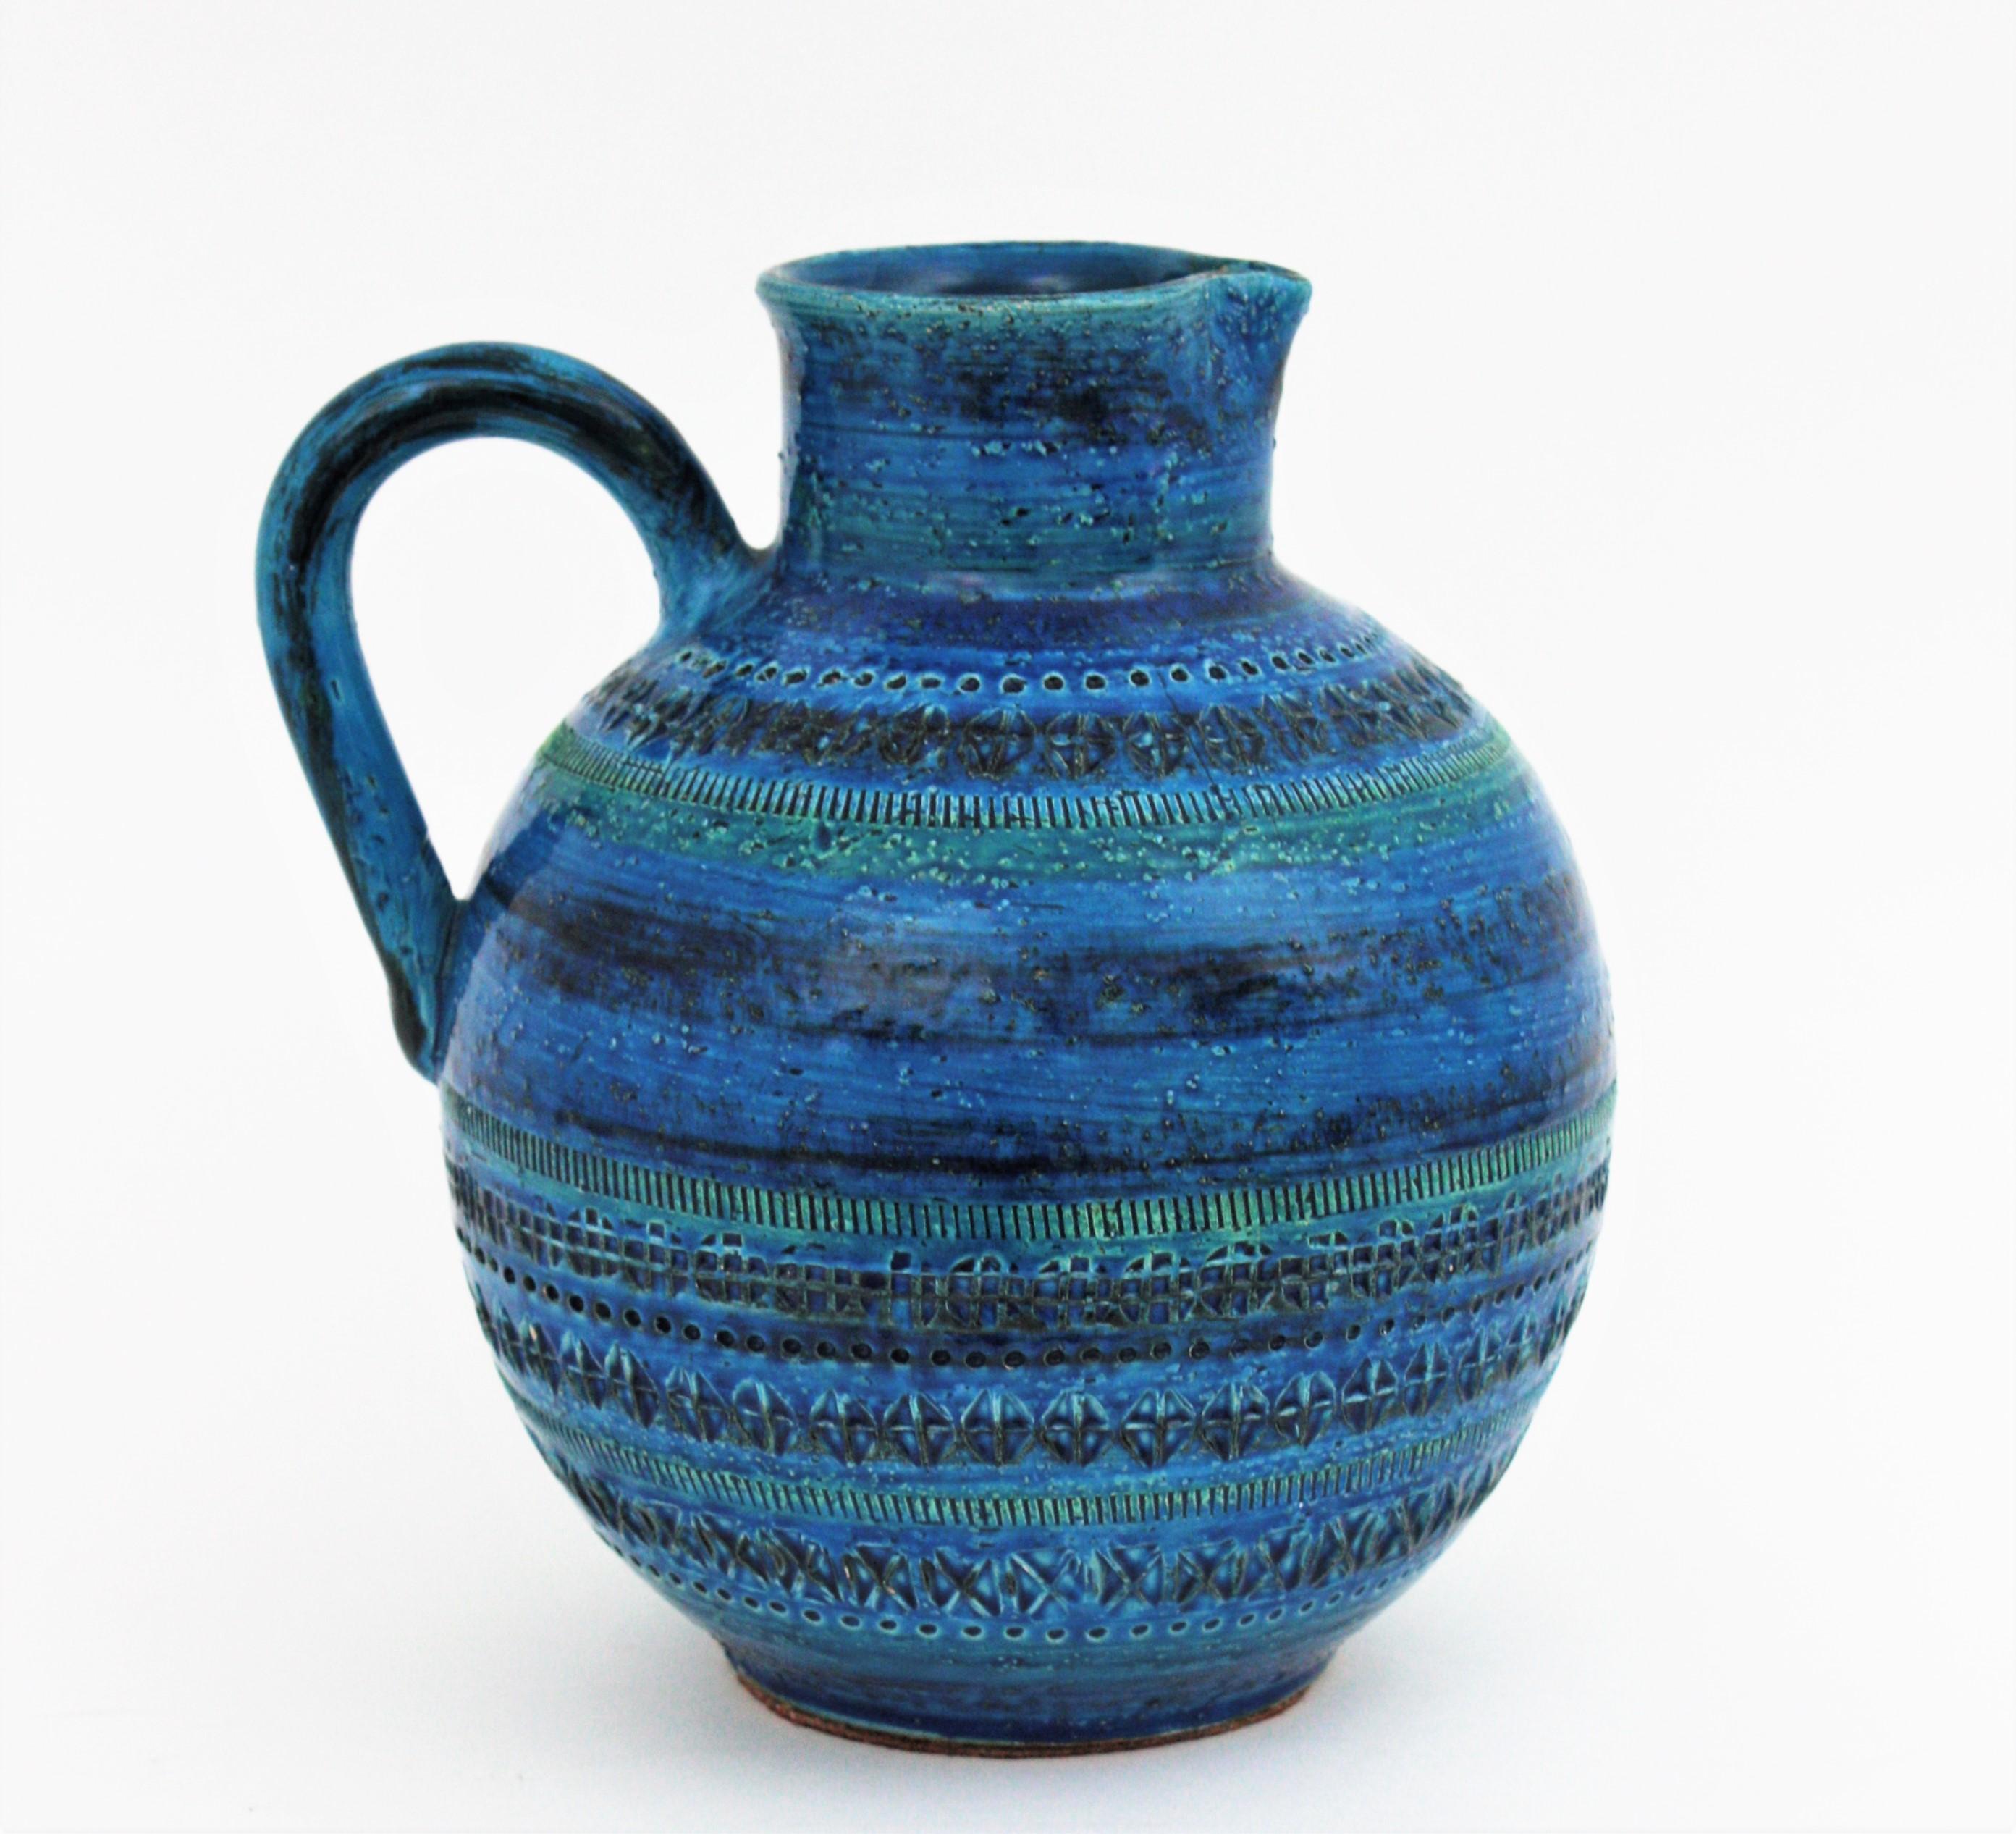 Unusual Mid-Century Modern blue glazed ceramic (Rimini Blu) large jug/ ball shaped pitcher, Italy, 1950-1960s.
Designed by Aldo Londi and manufactured by Bitossi. Handcrafted in Italy with hand carved geometric design in a glazed vibrant turquoise